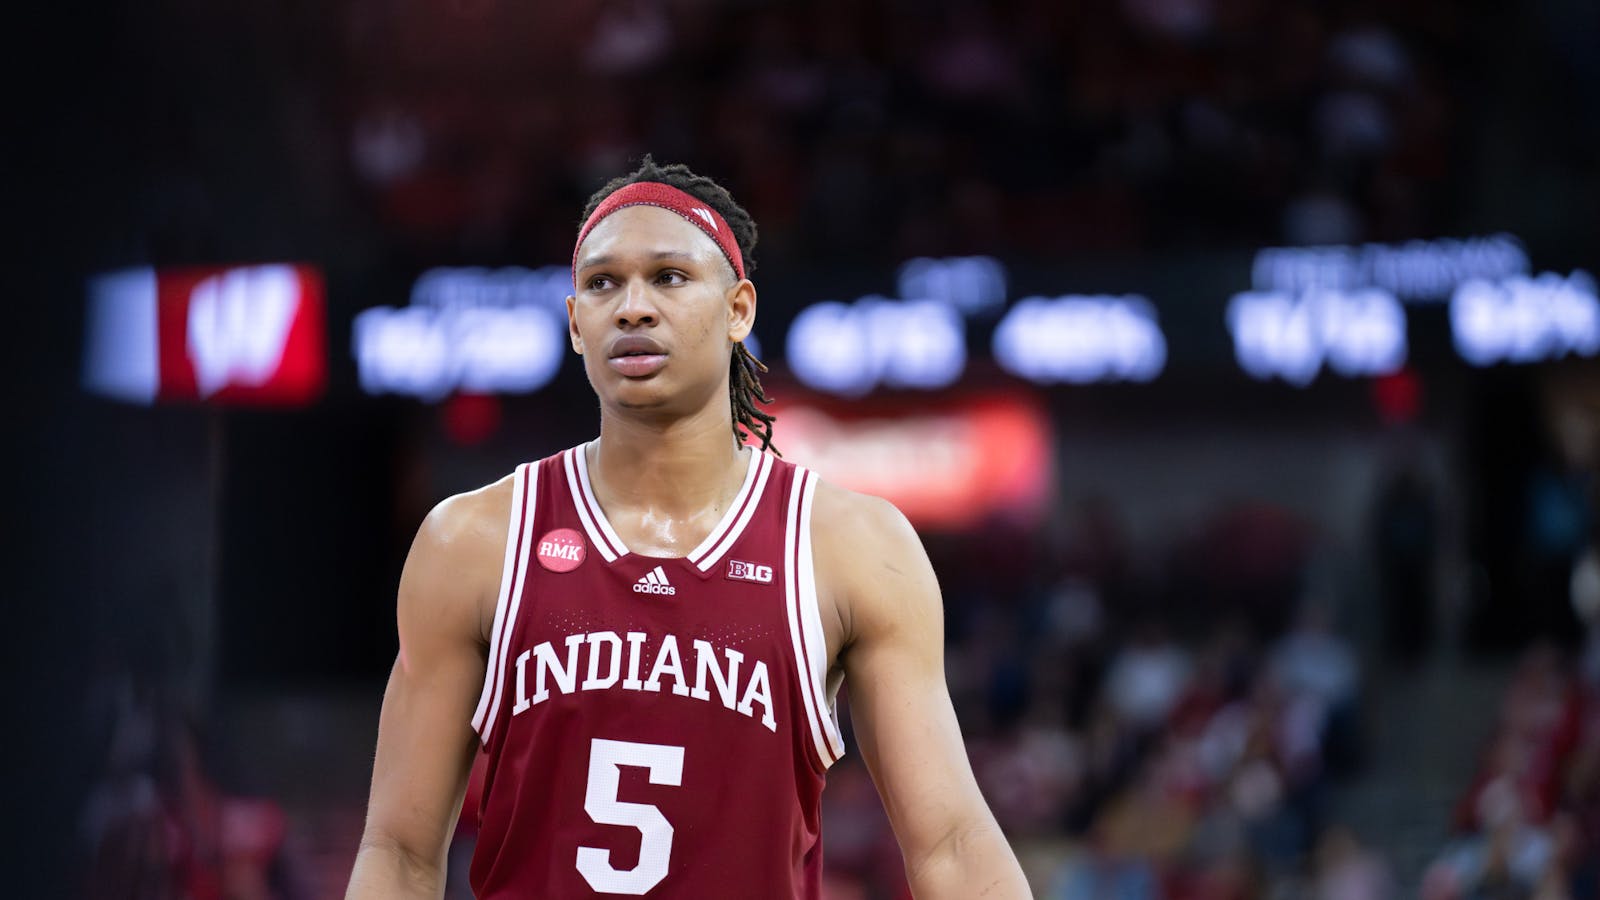 Indiana's losing streak continues in defeat at Penn State – The Hoosier Network